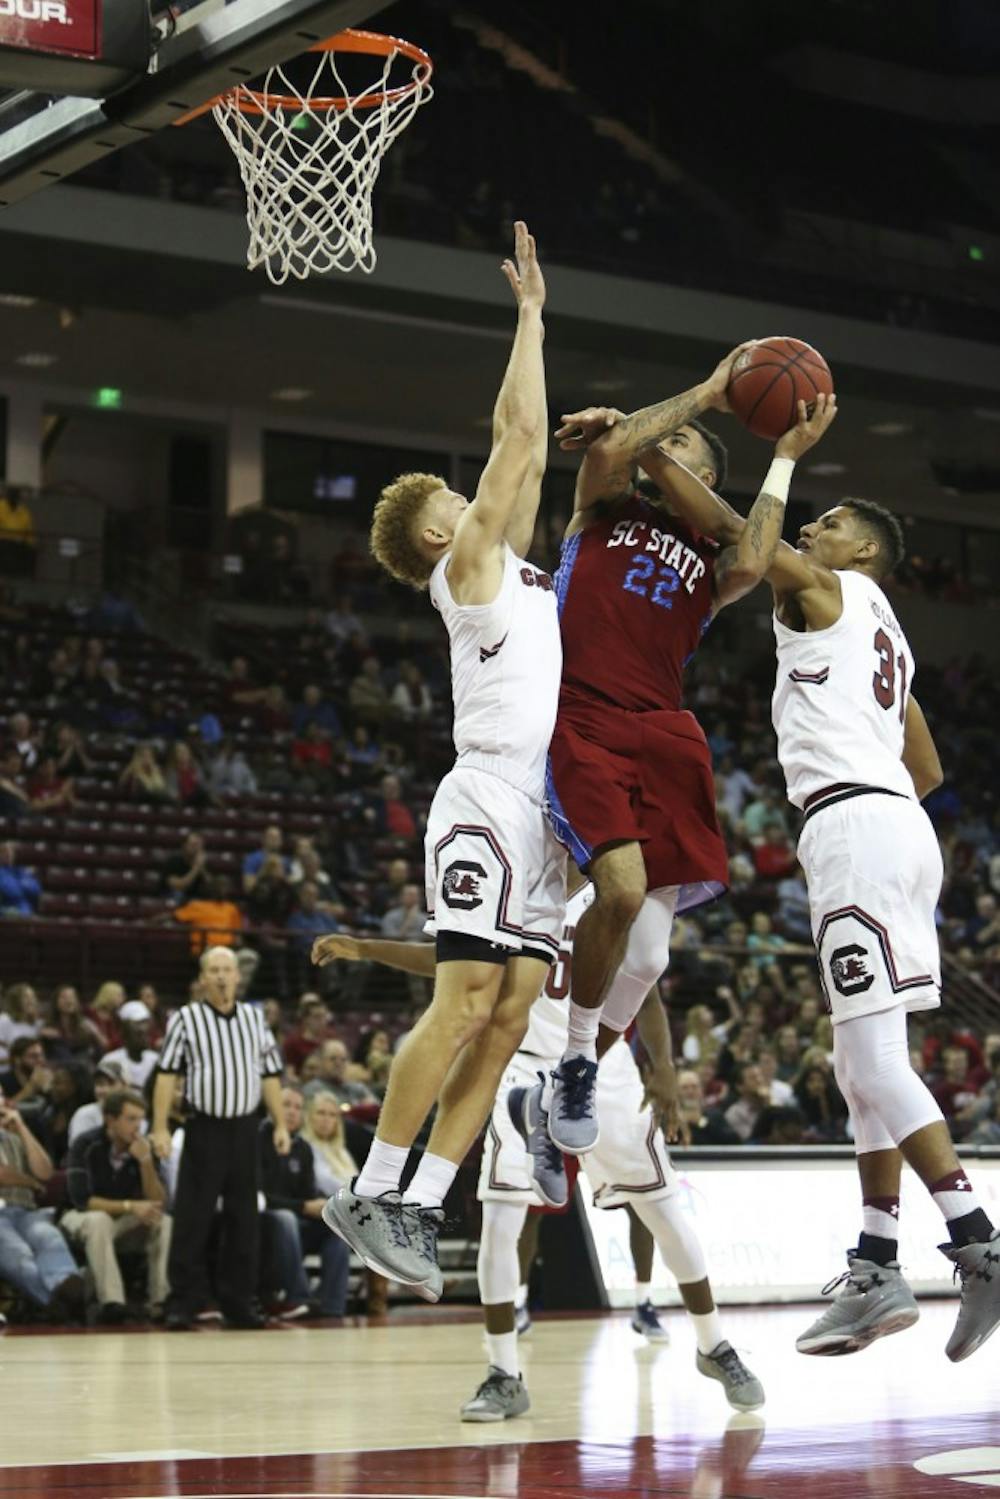 mbb_scstate_collins_021